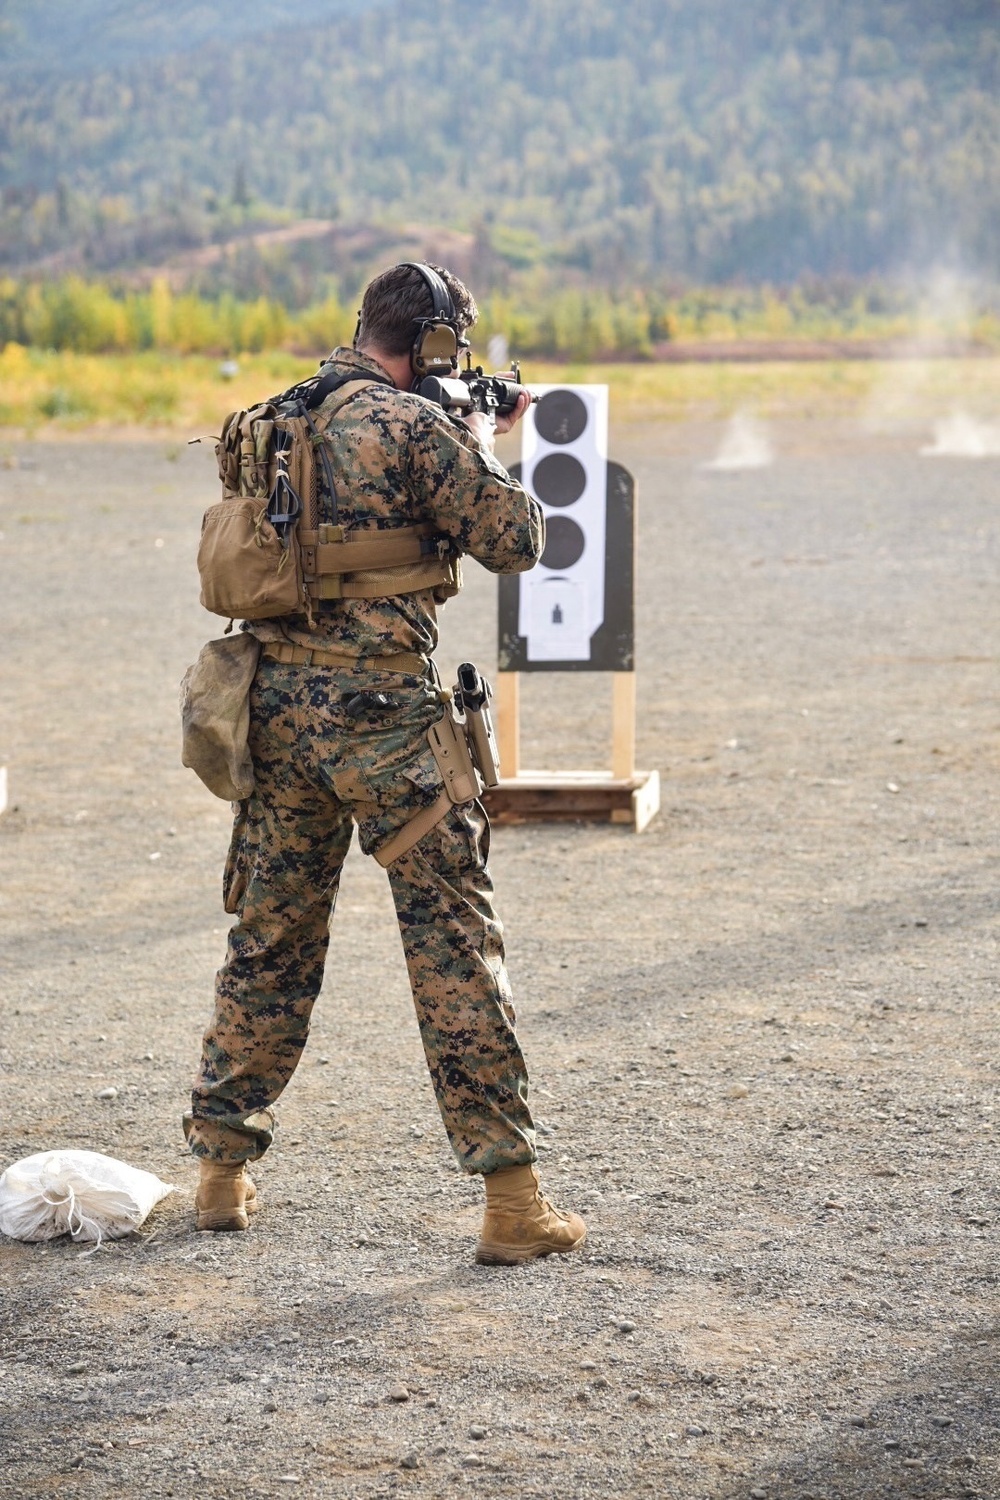 EOD Group One Conducts Small Arms Training